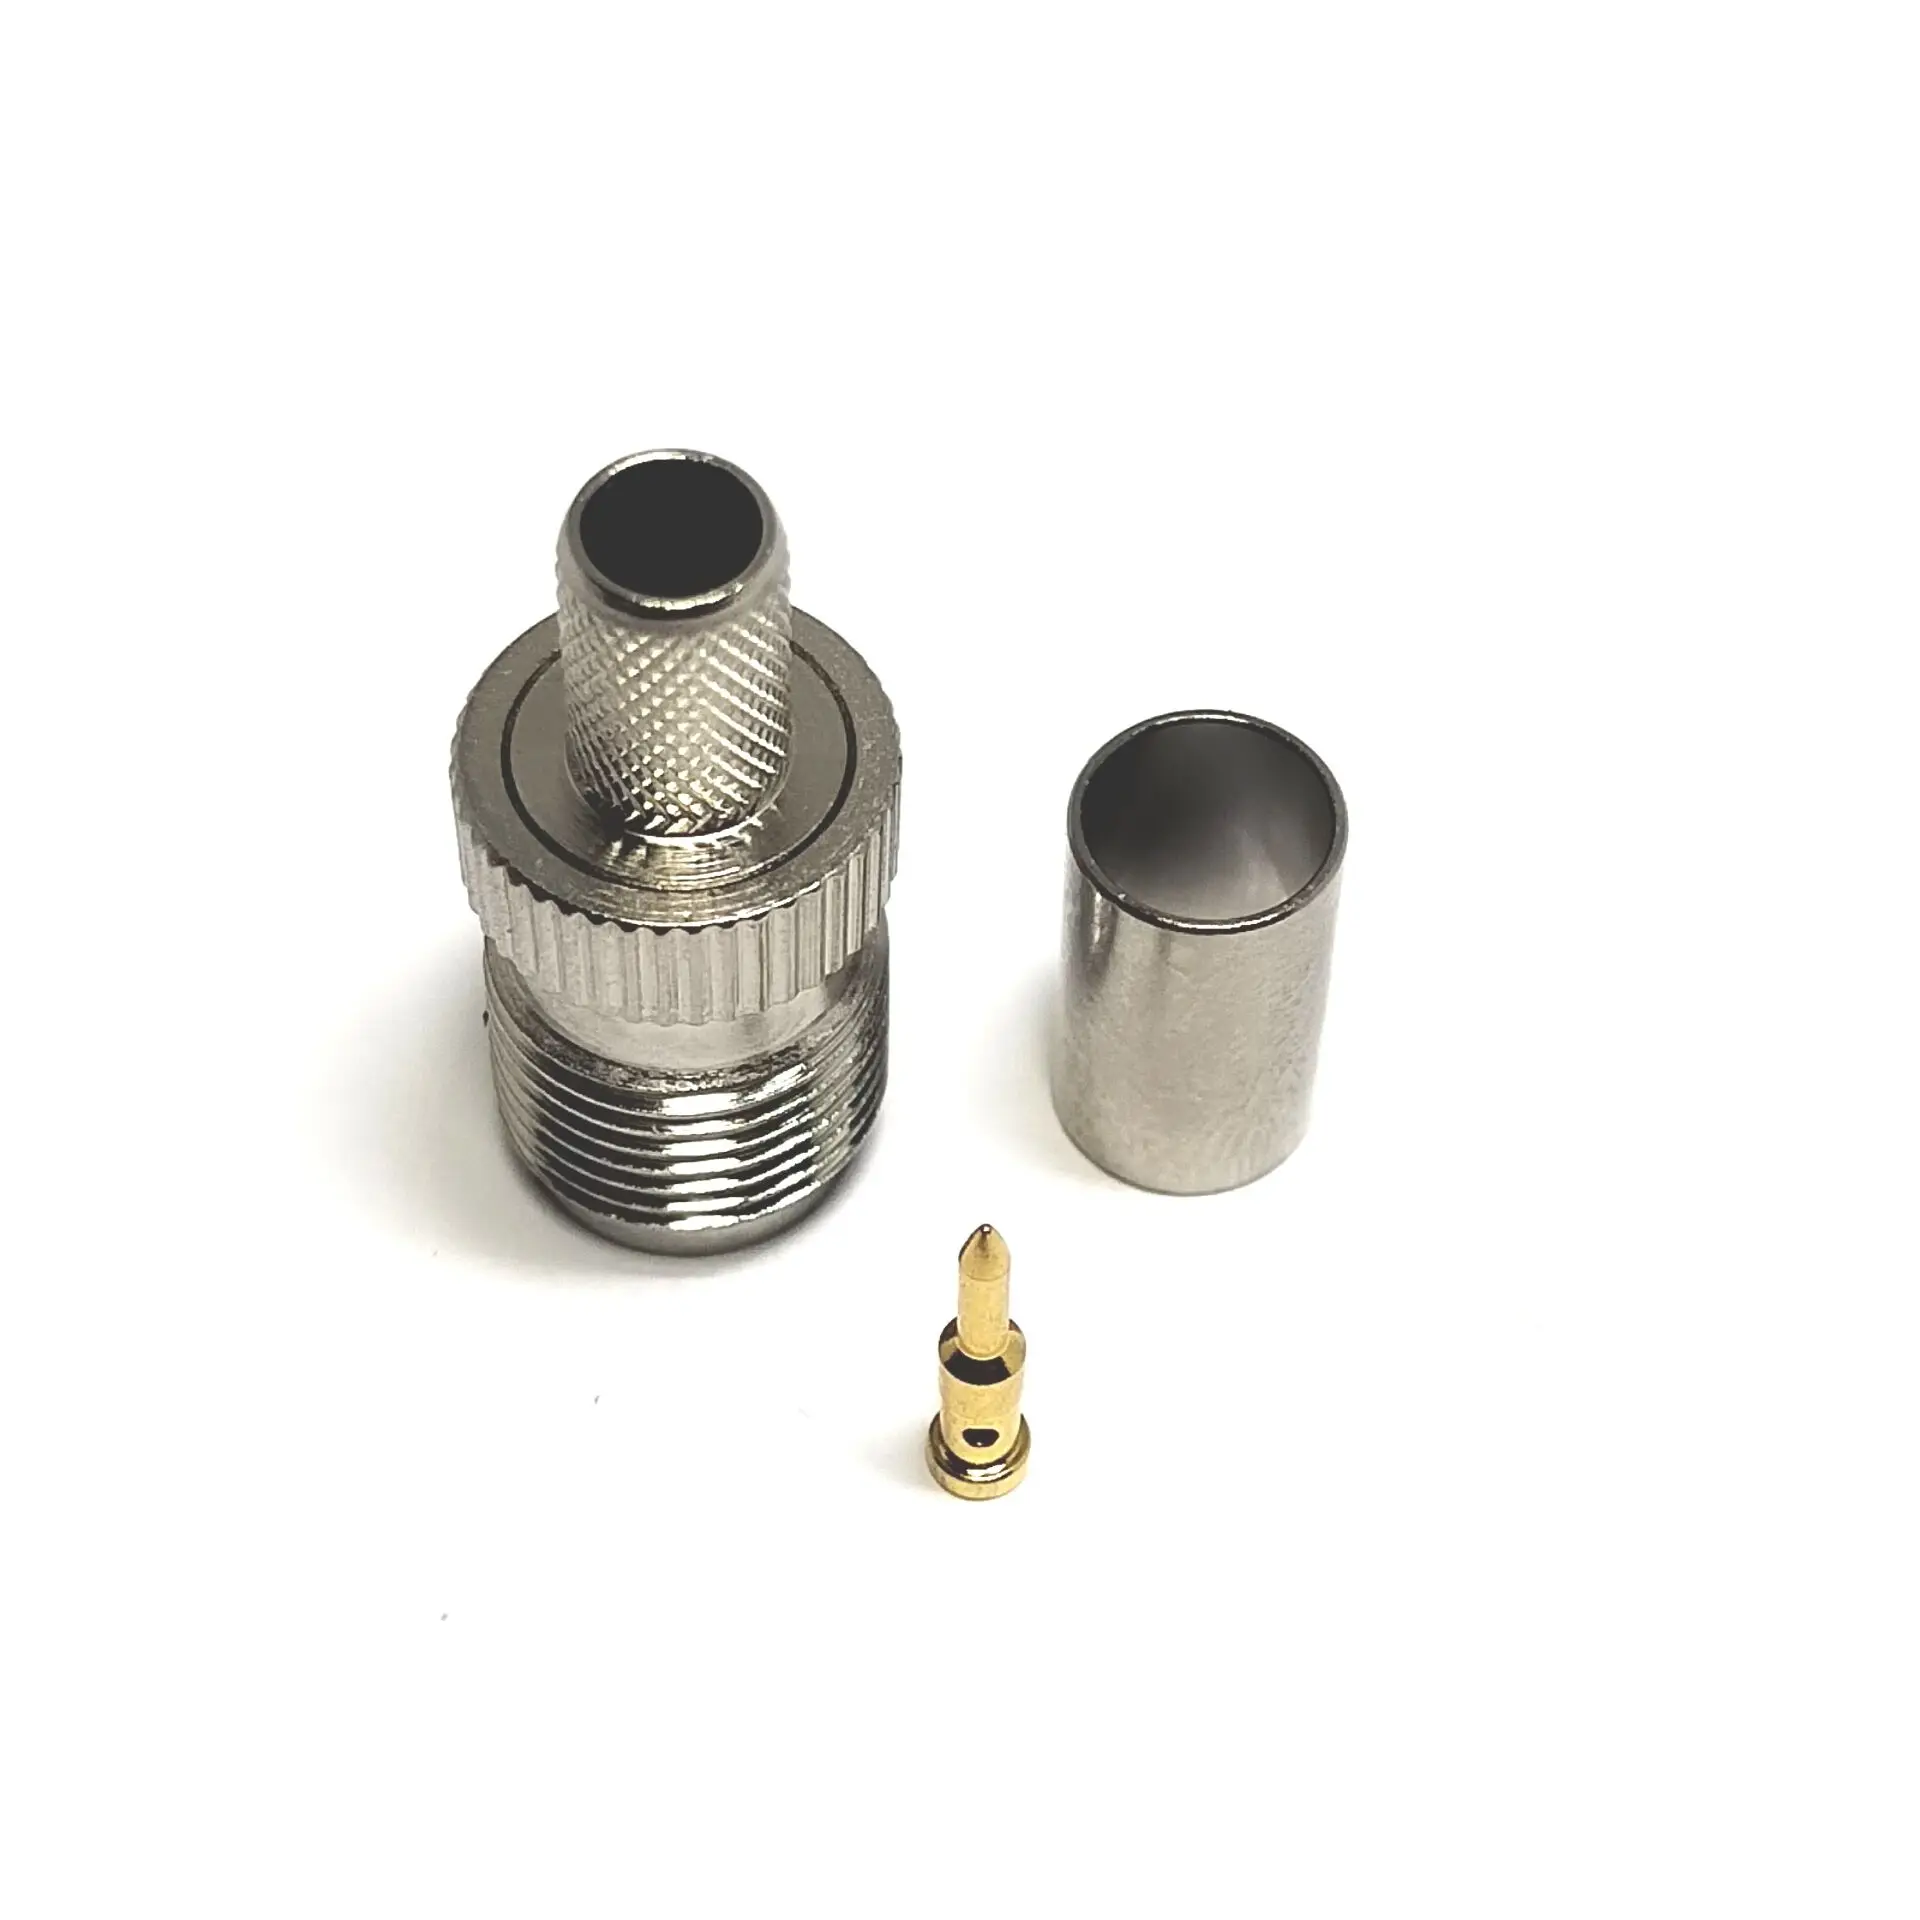 Nickel plated RP Tnc female jack  lmr240 H155 cable  crimp straight Reverse polarity RF coax  connector supplier